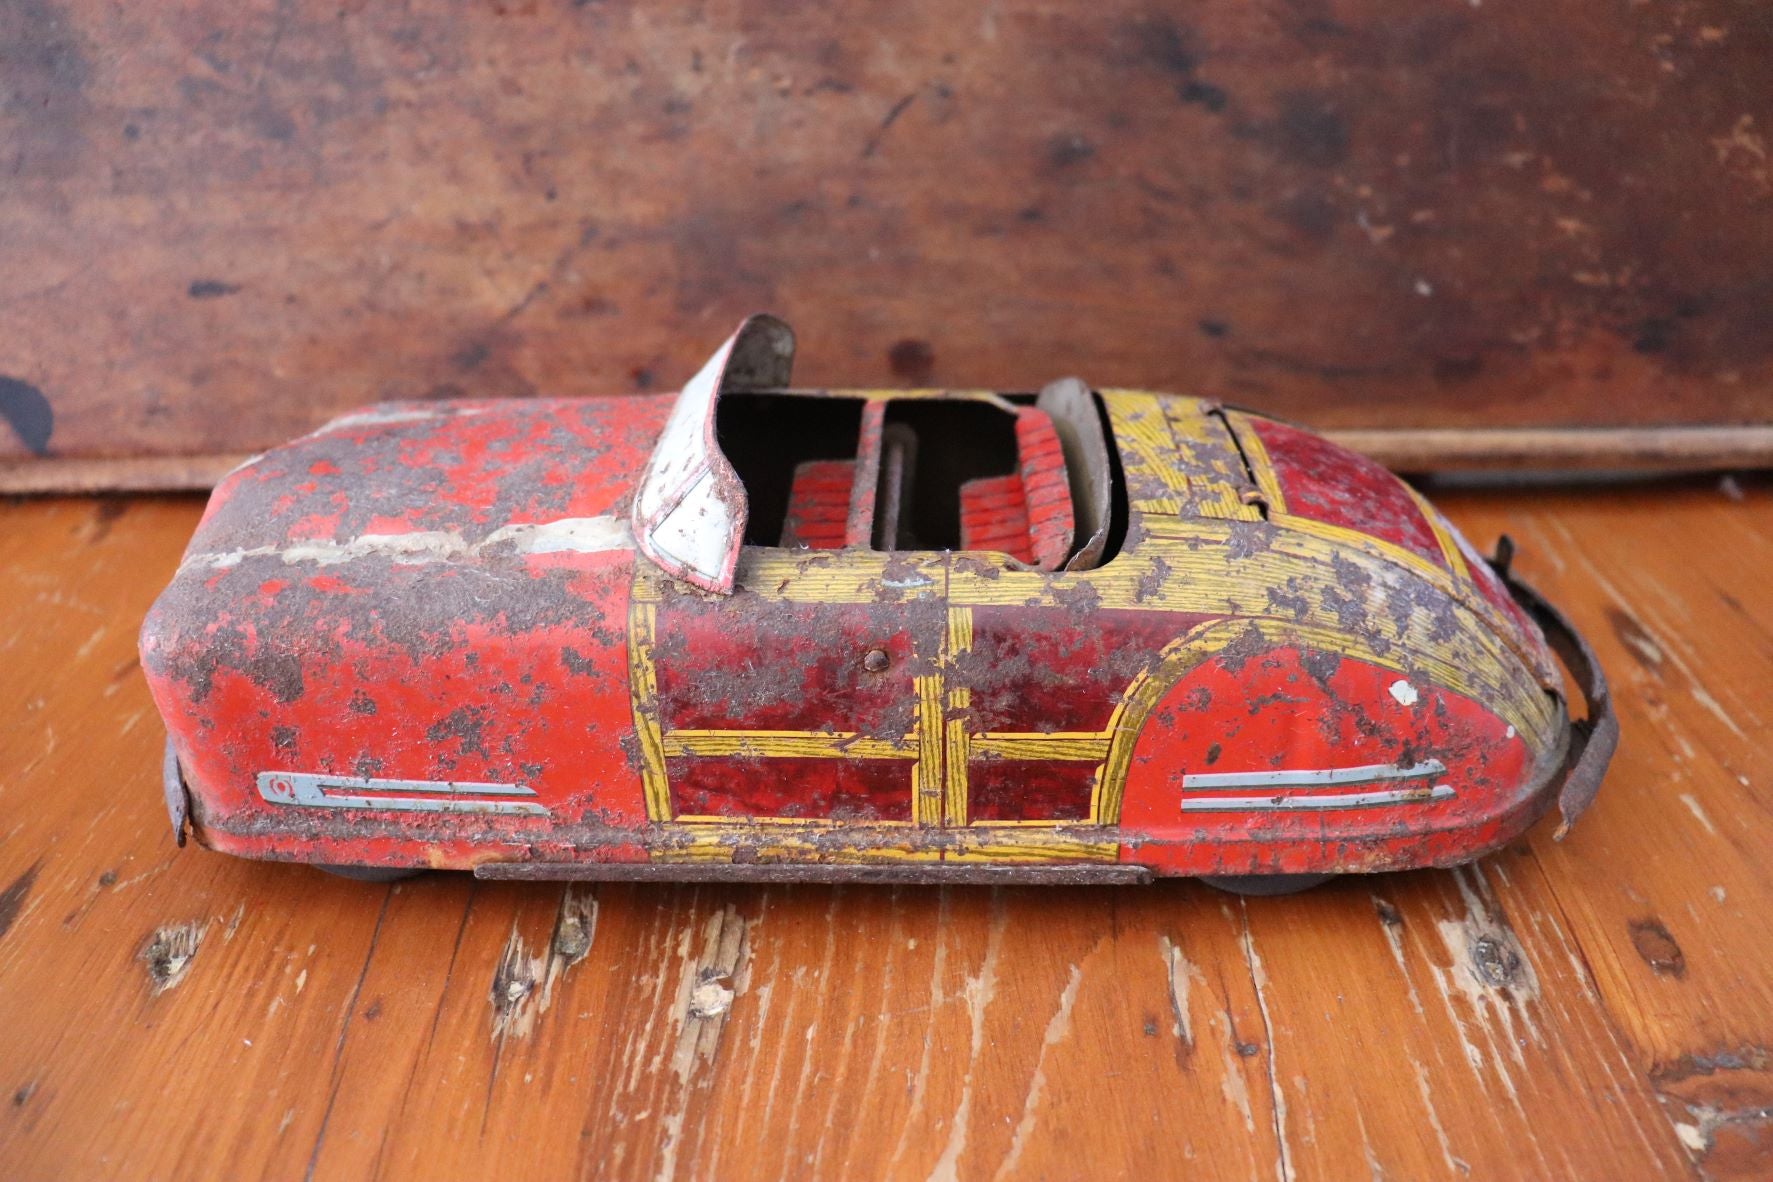 Old Wyandotte Pressed Steel Toy Convertible Car